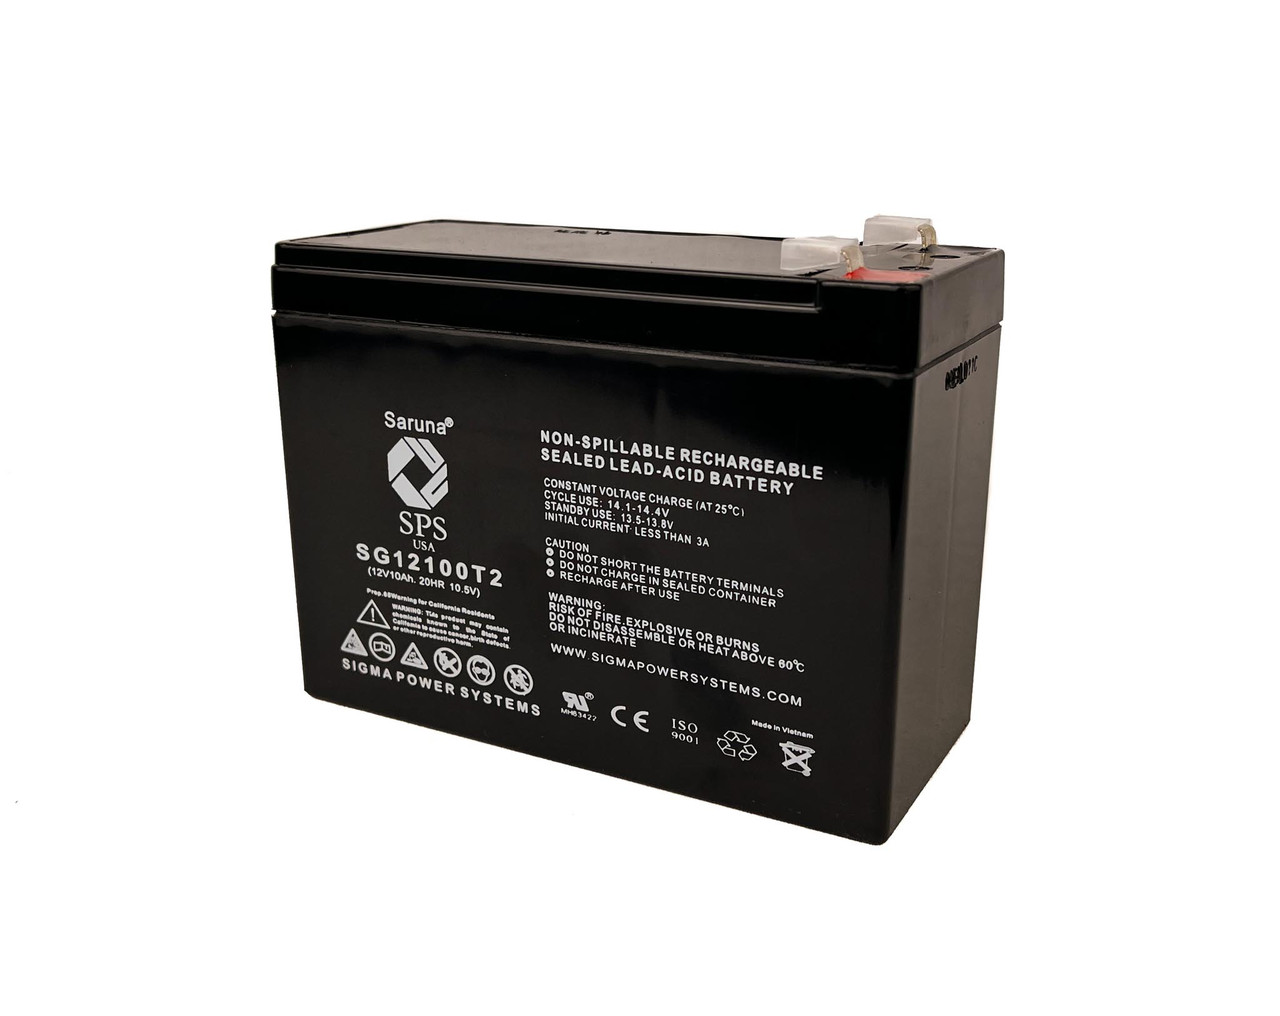 Raion Power 12V 10Ah Non-Spillable Replacement Rechargebale Battery for Haijiu HG-10A-12